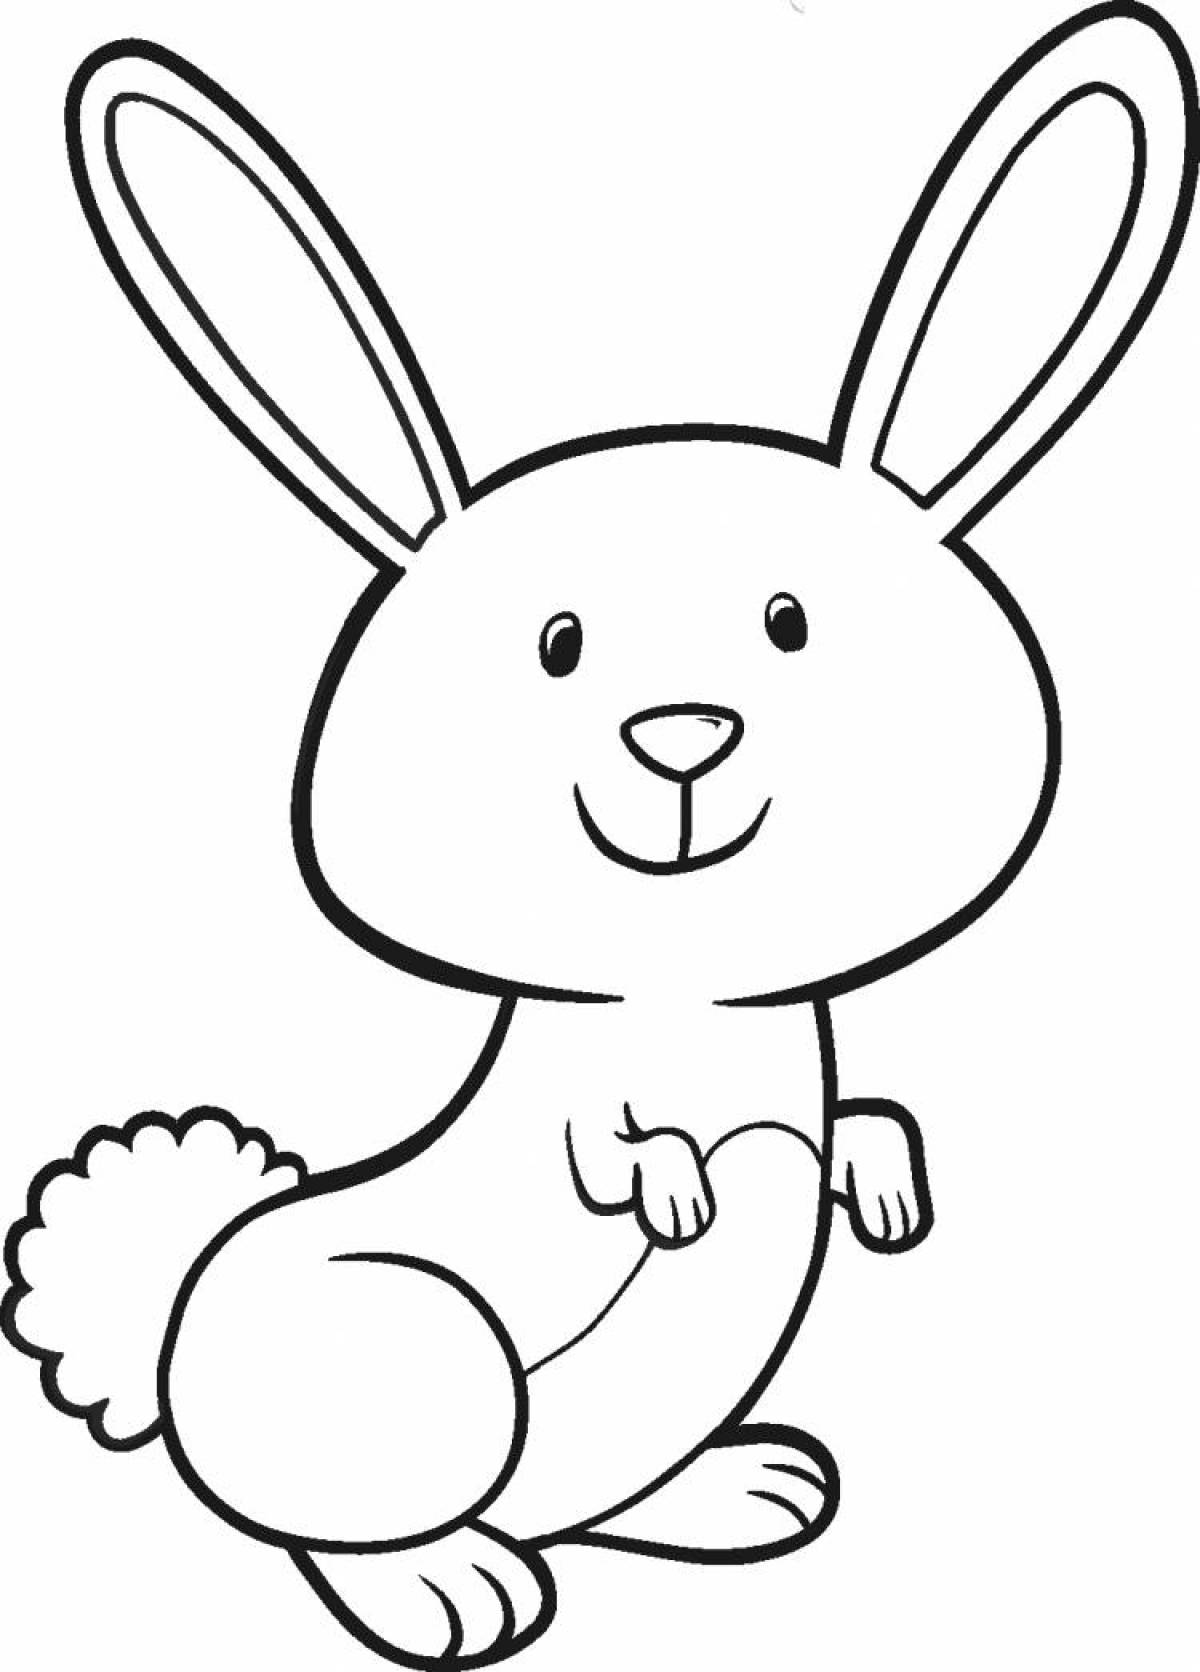 Fancy coloring page bunny picture